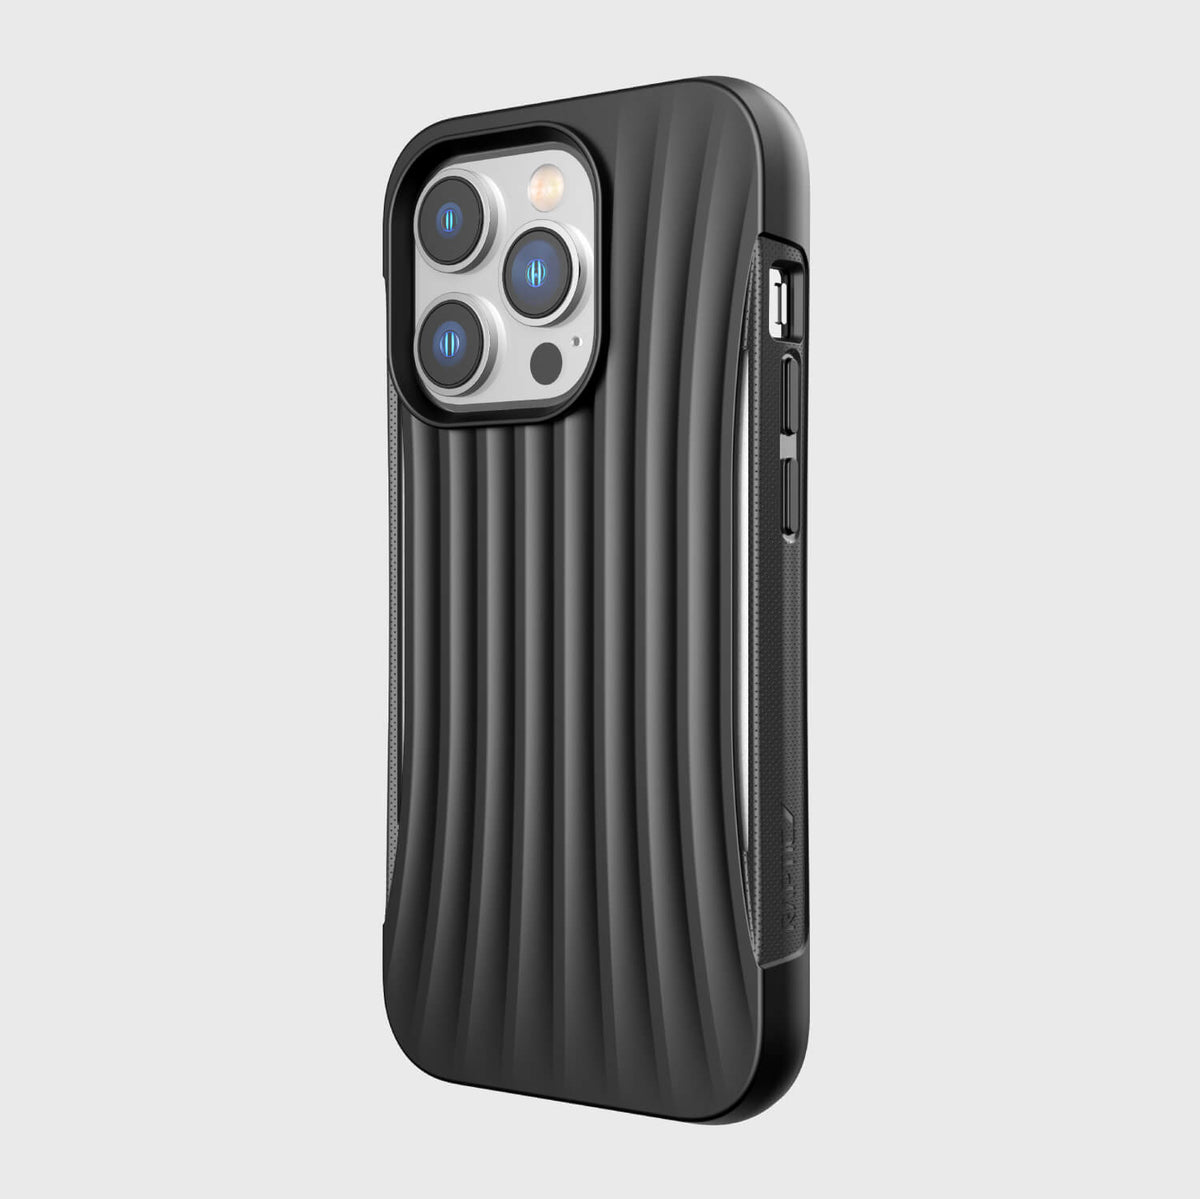 The back of the iPhone 14 Pro Case ~ Clutch by Raptic is shown.